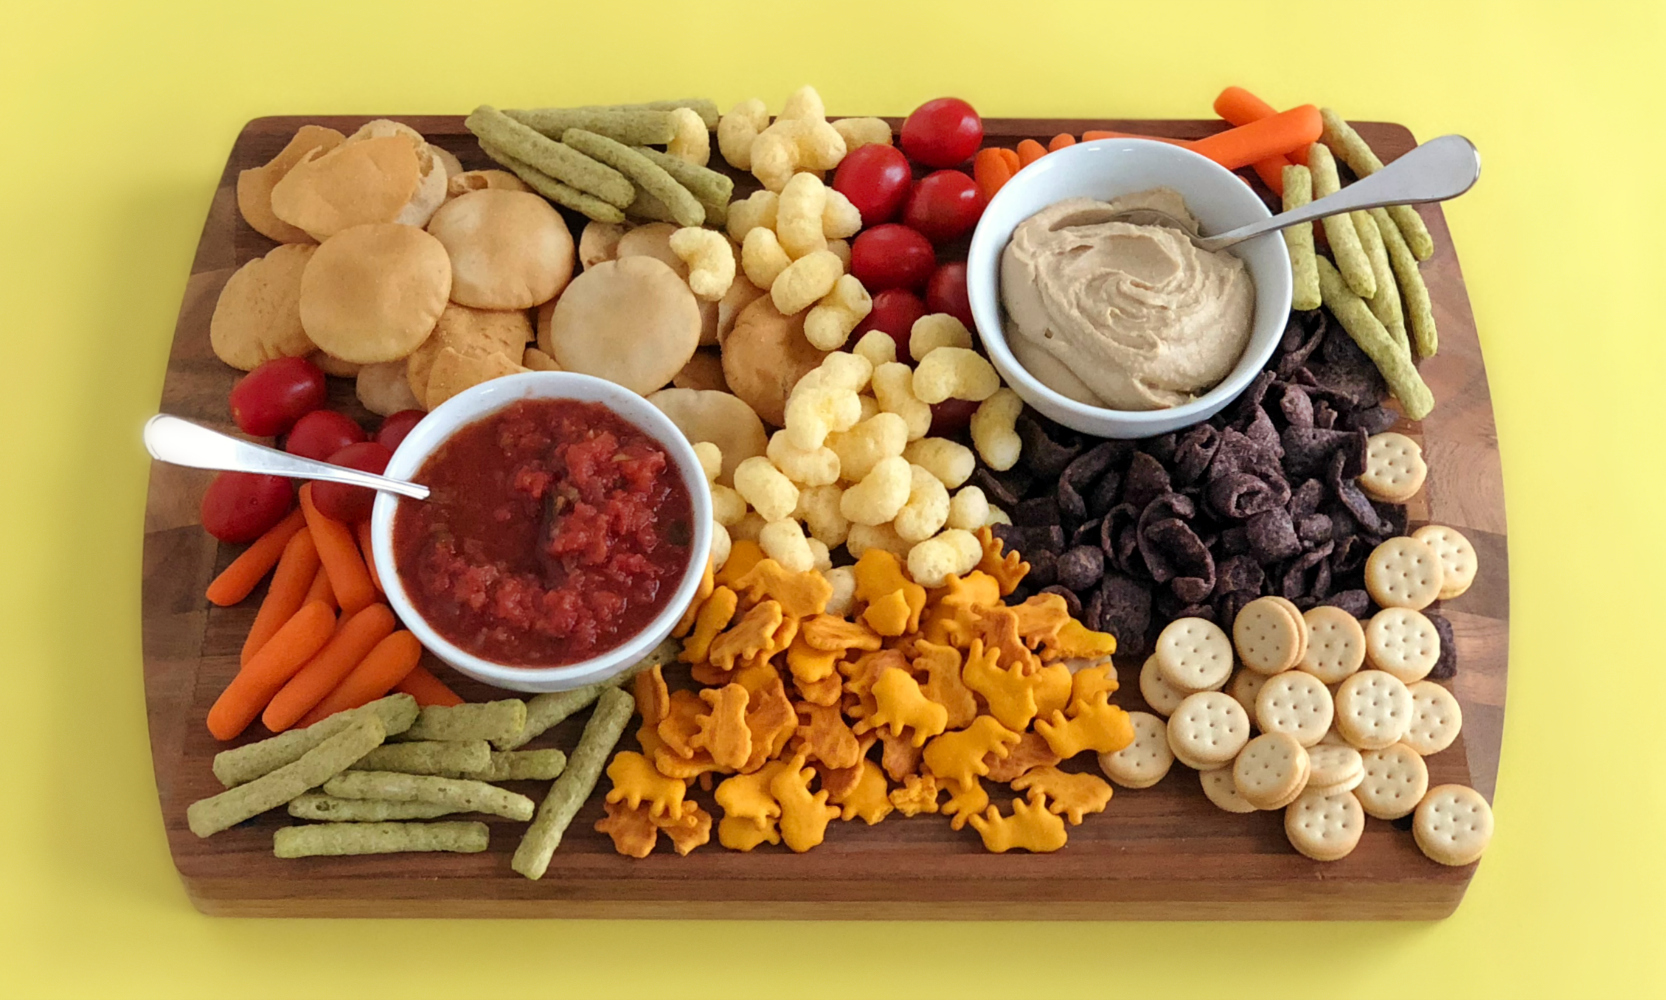 Keeping Snacking Fun with an After School Snack Board